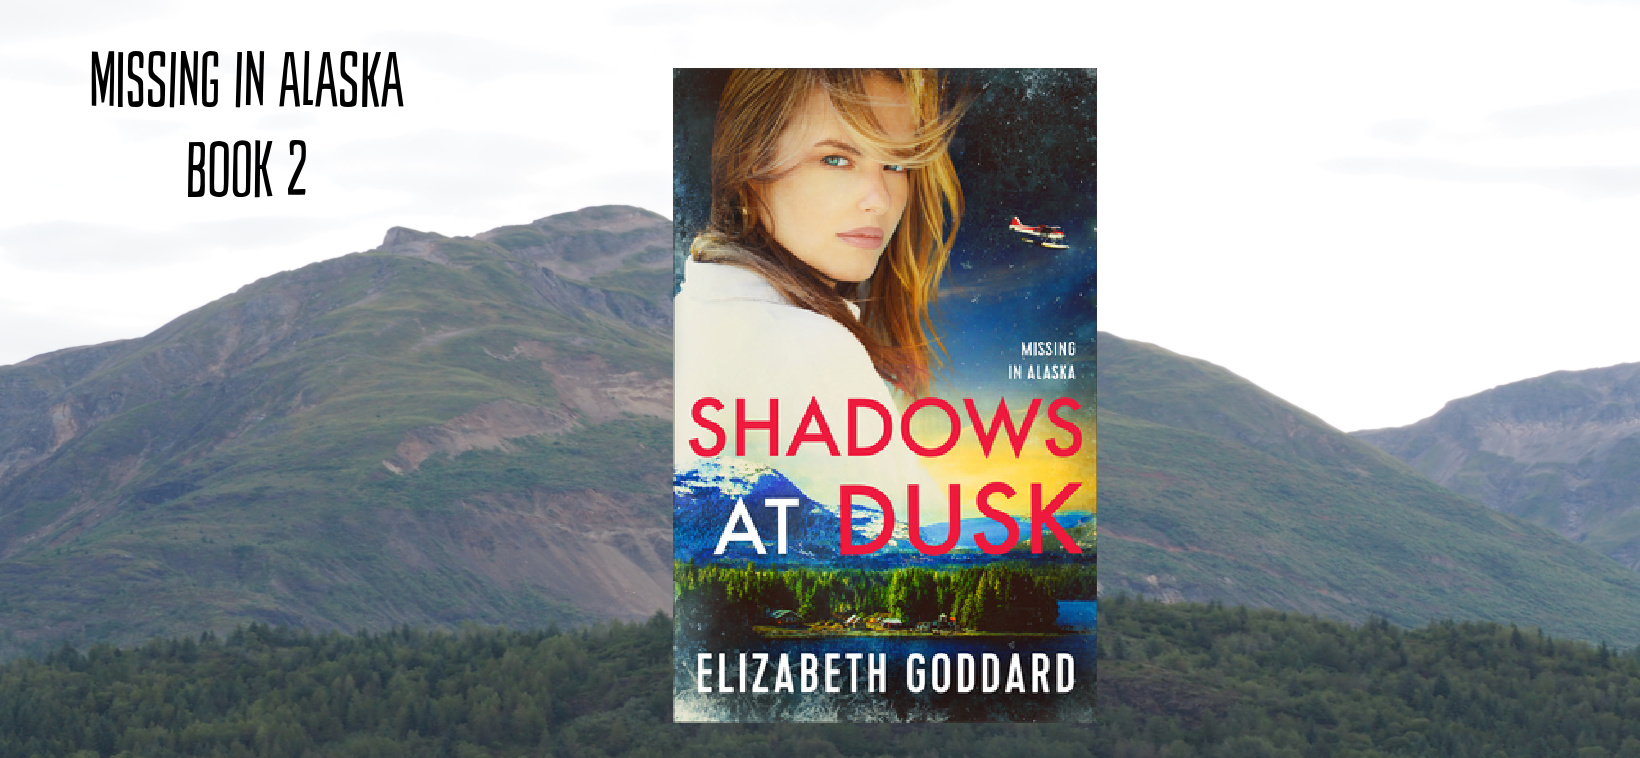 Shadows at Dusk by Elizabeth Goddard is the second book in the Missing in Alaska series.